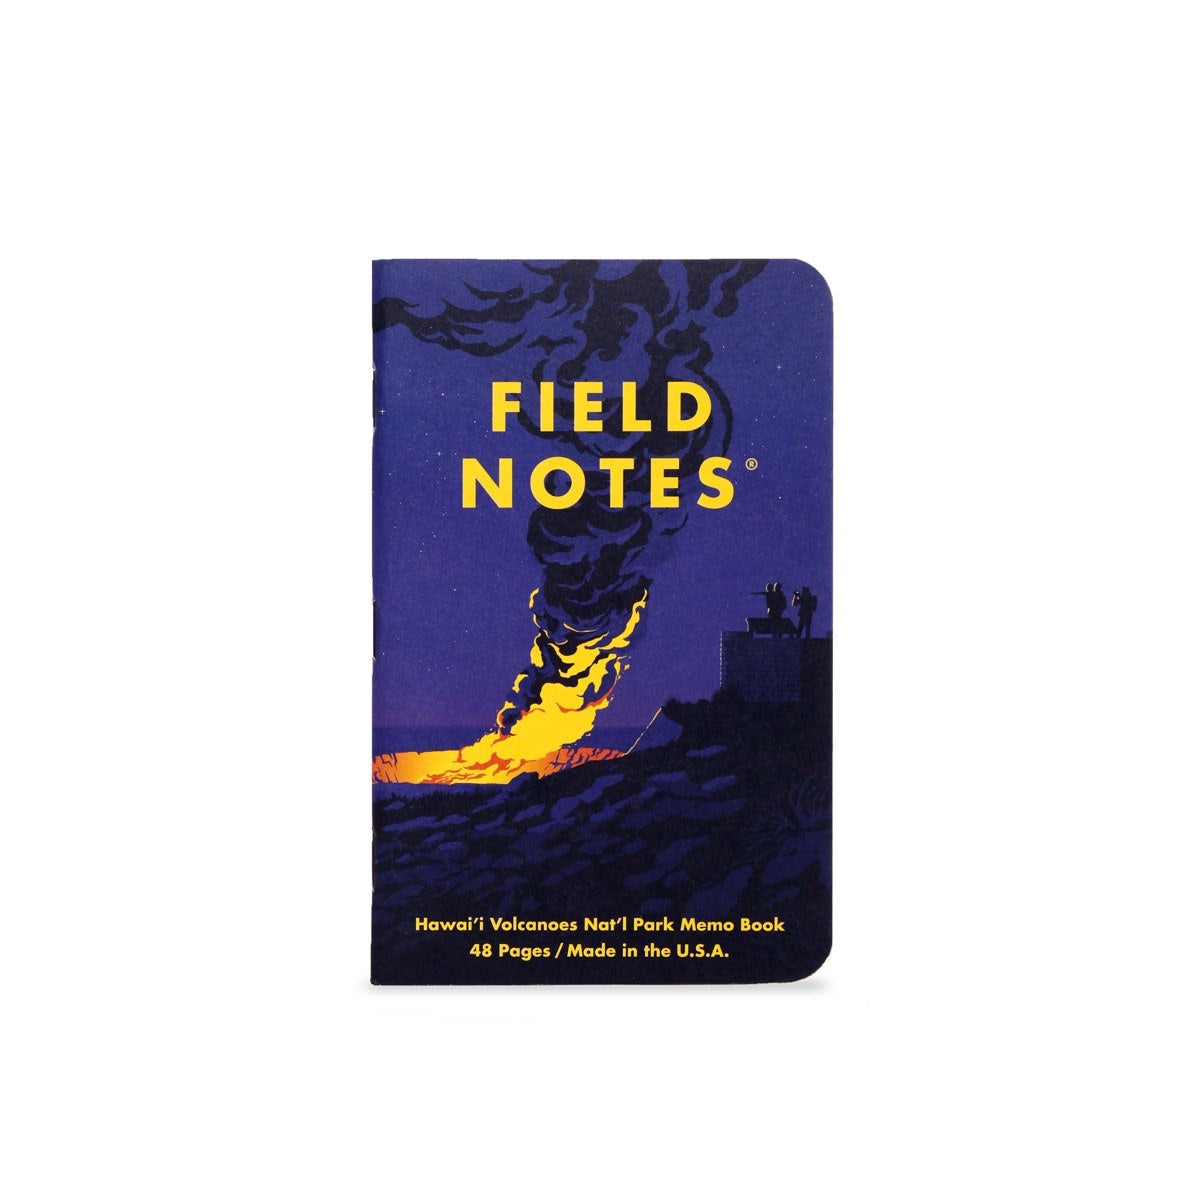 Field Notes Notebook - National Parks Series F: Glacier, Hawaii Volcanoes, Everglades (3-Packs)